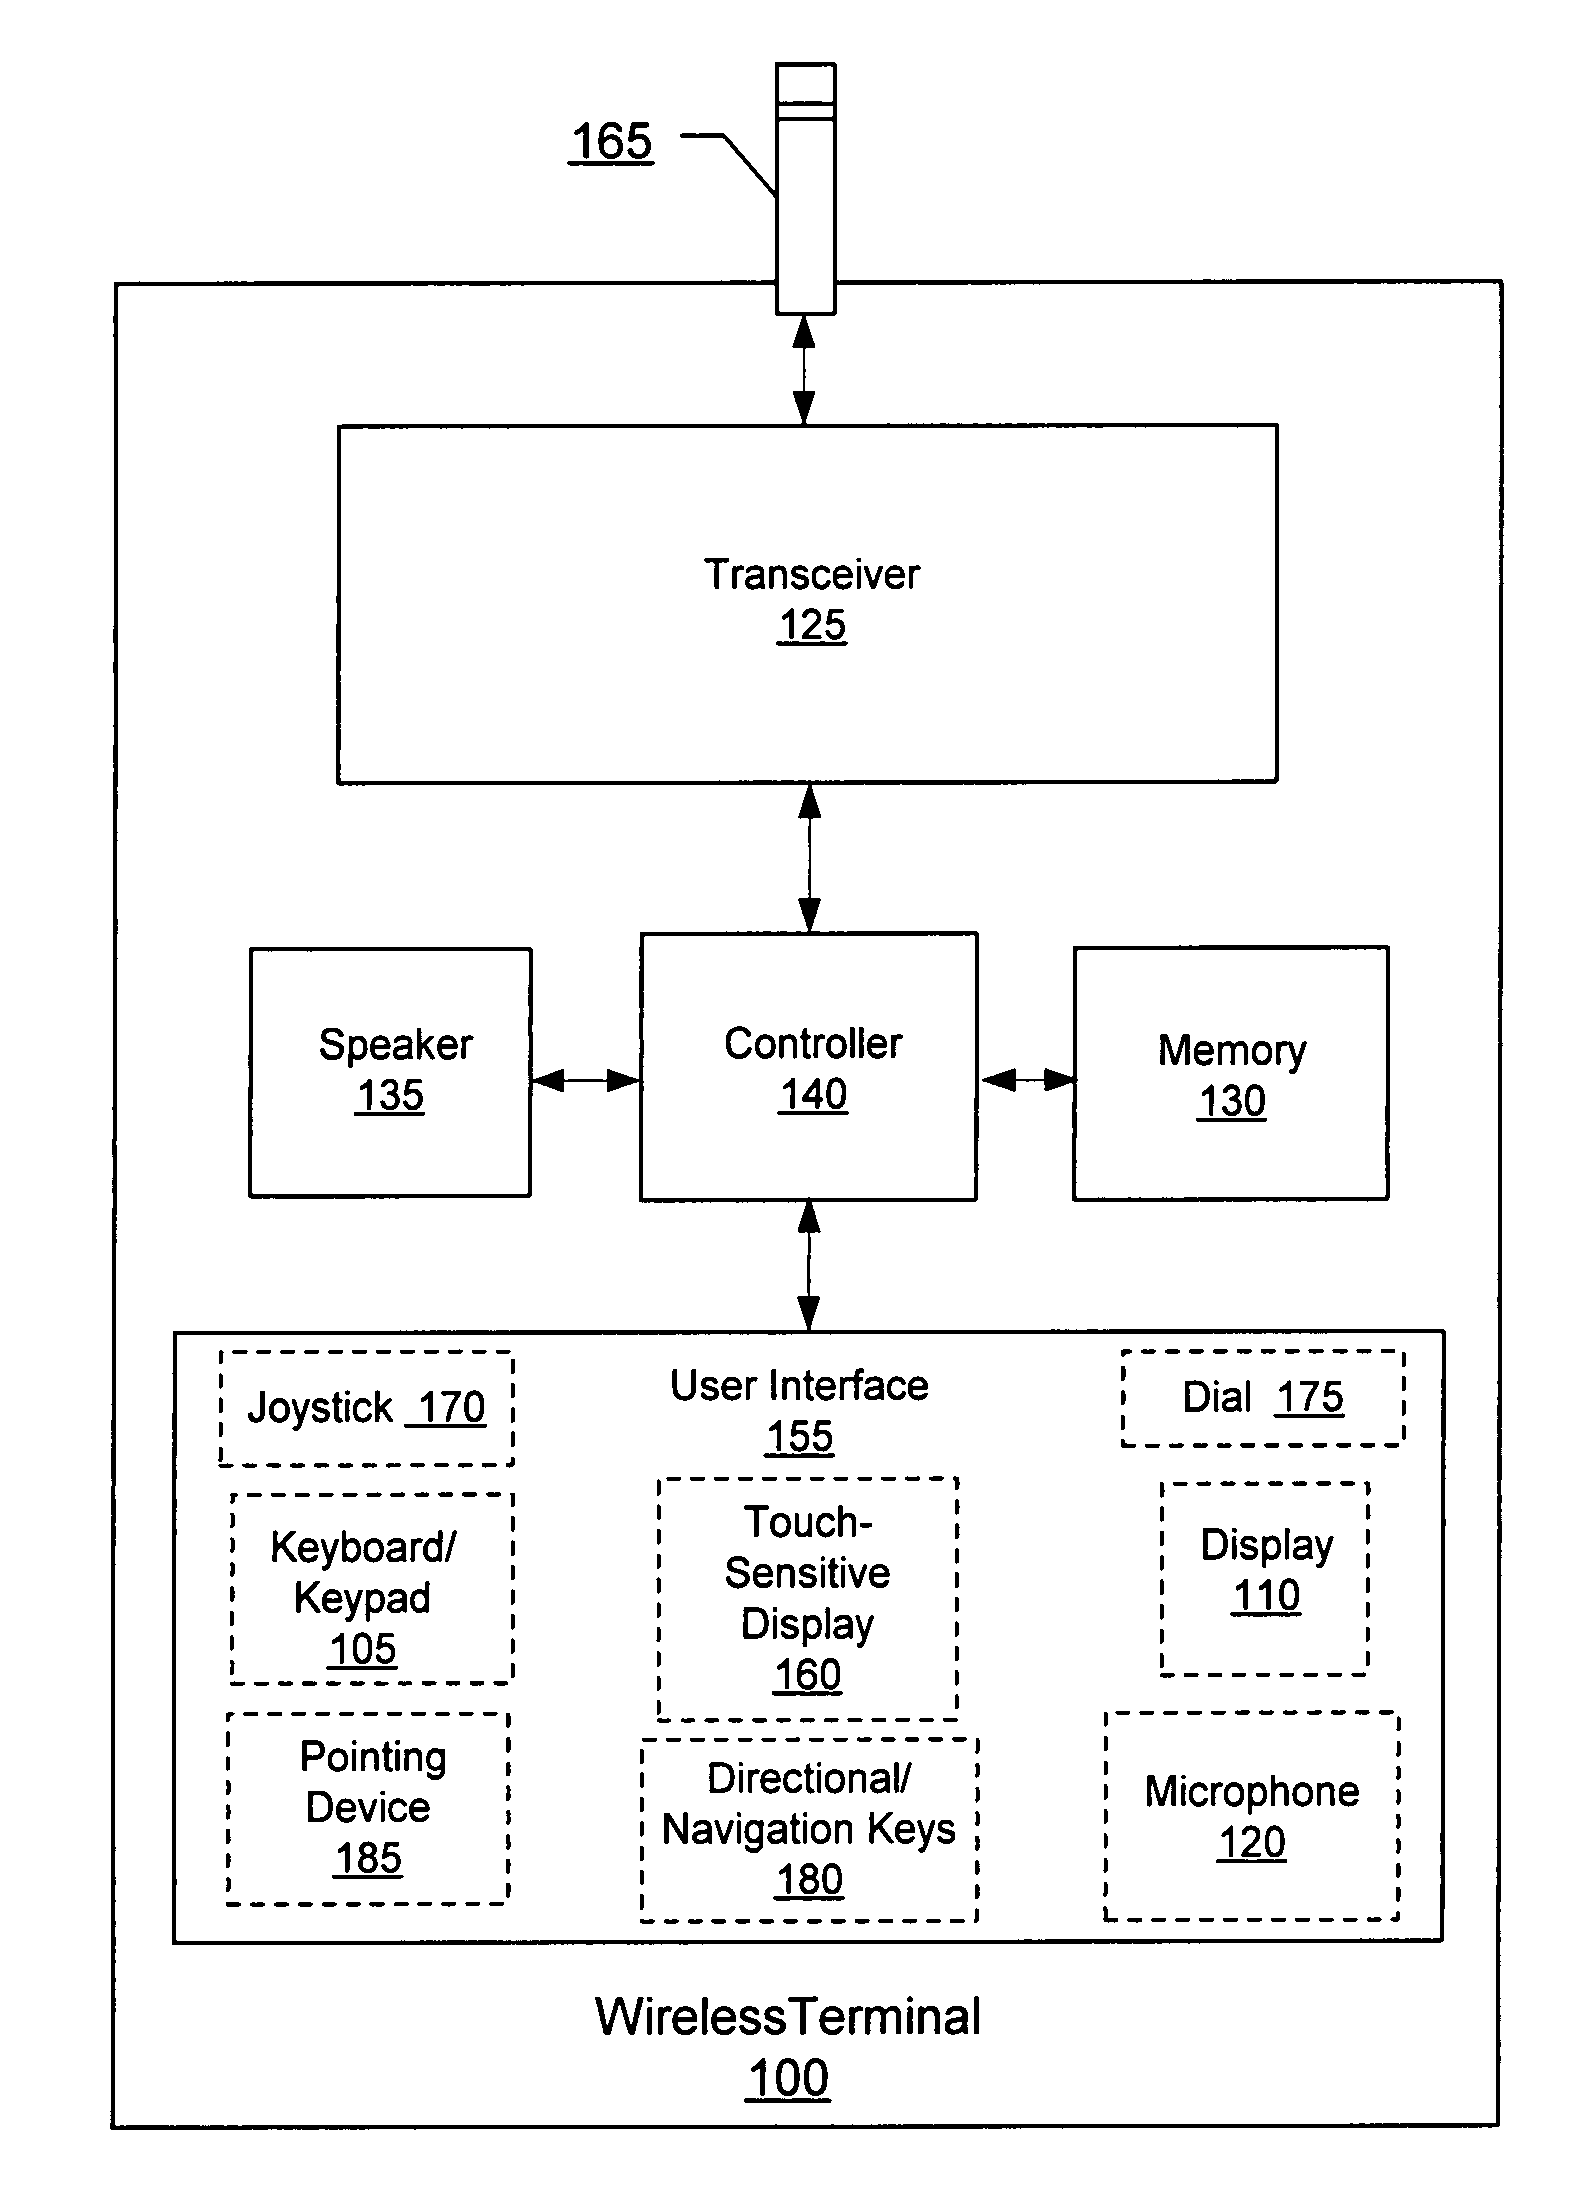 Devices, methods, and computer program products for controlling power transfer to an antenna in a wireless mobile terminal